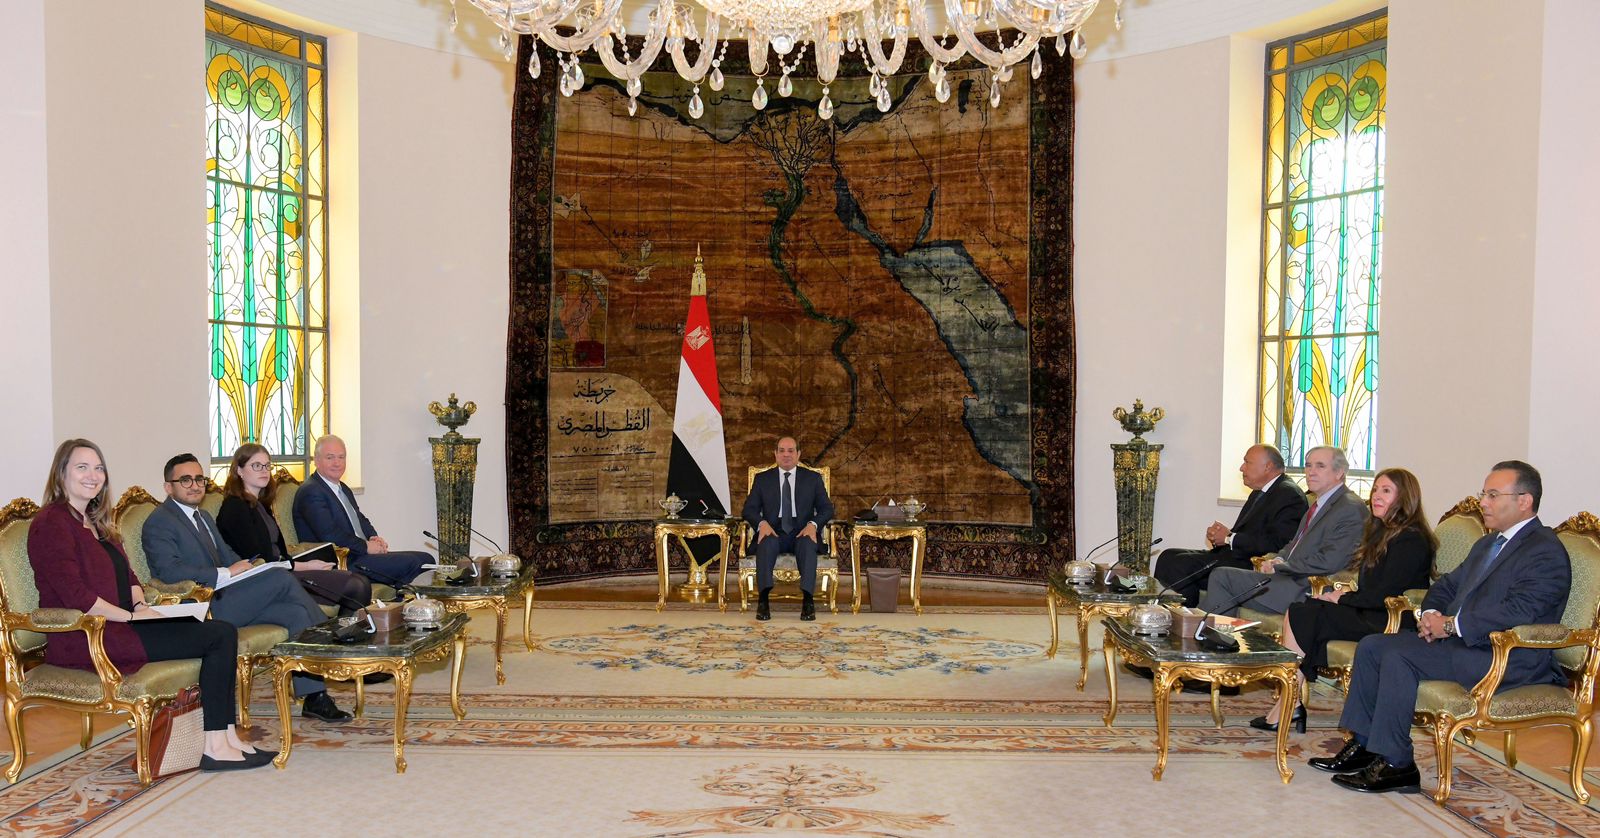 President Sisi stresses the necessity of starting a serious path with international consensus for a just and comprehensive settlement of the Palestinian issue